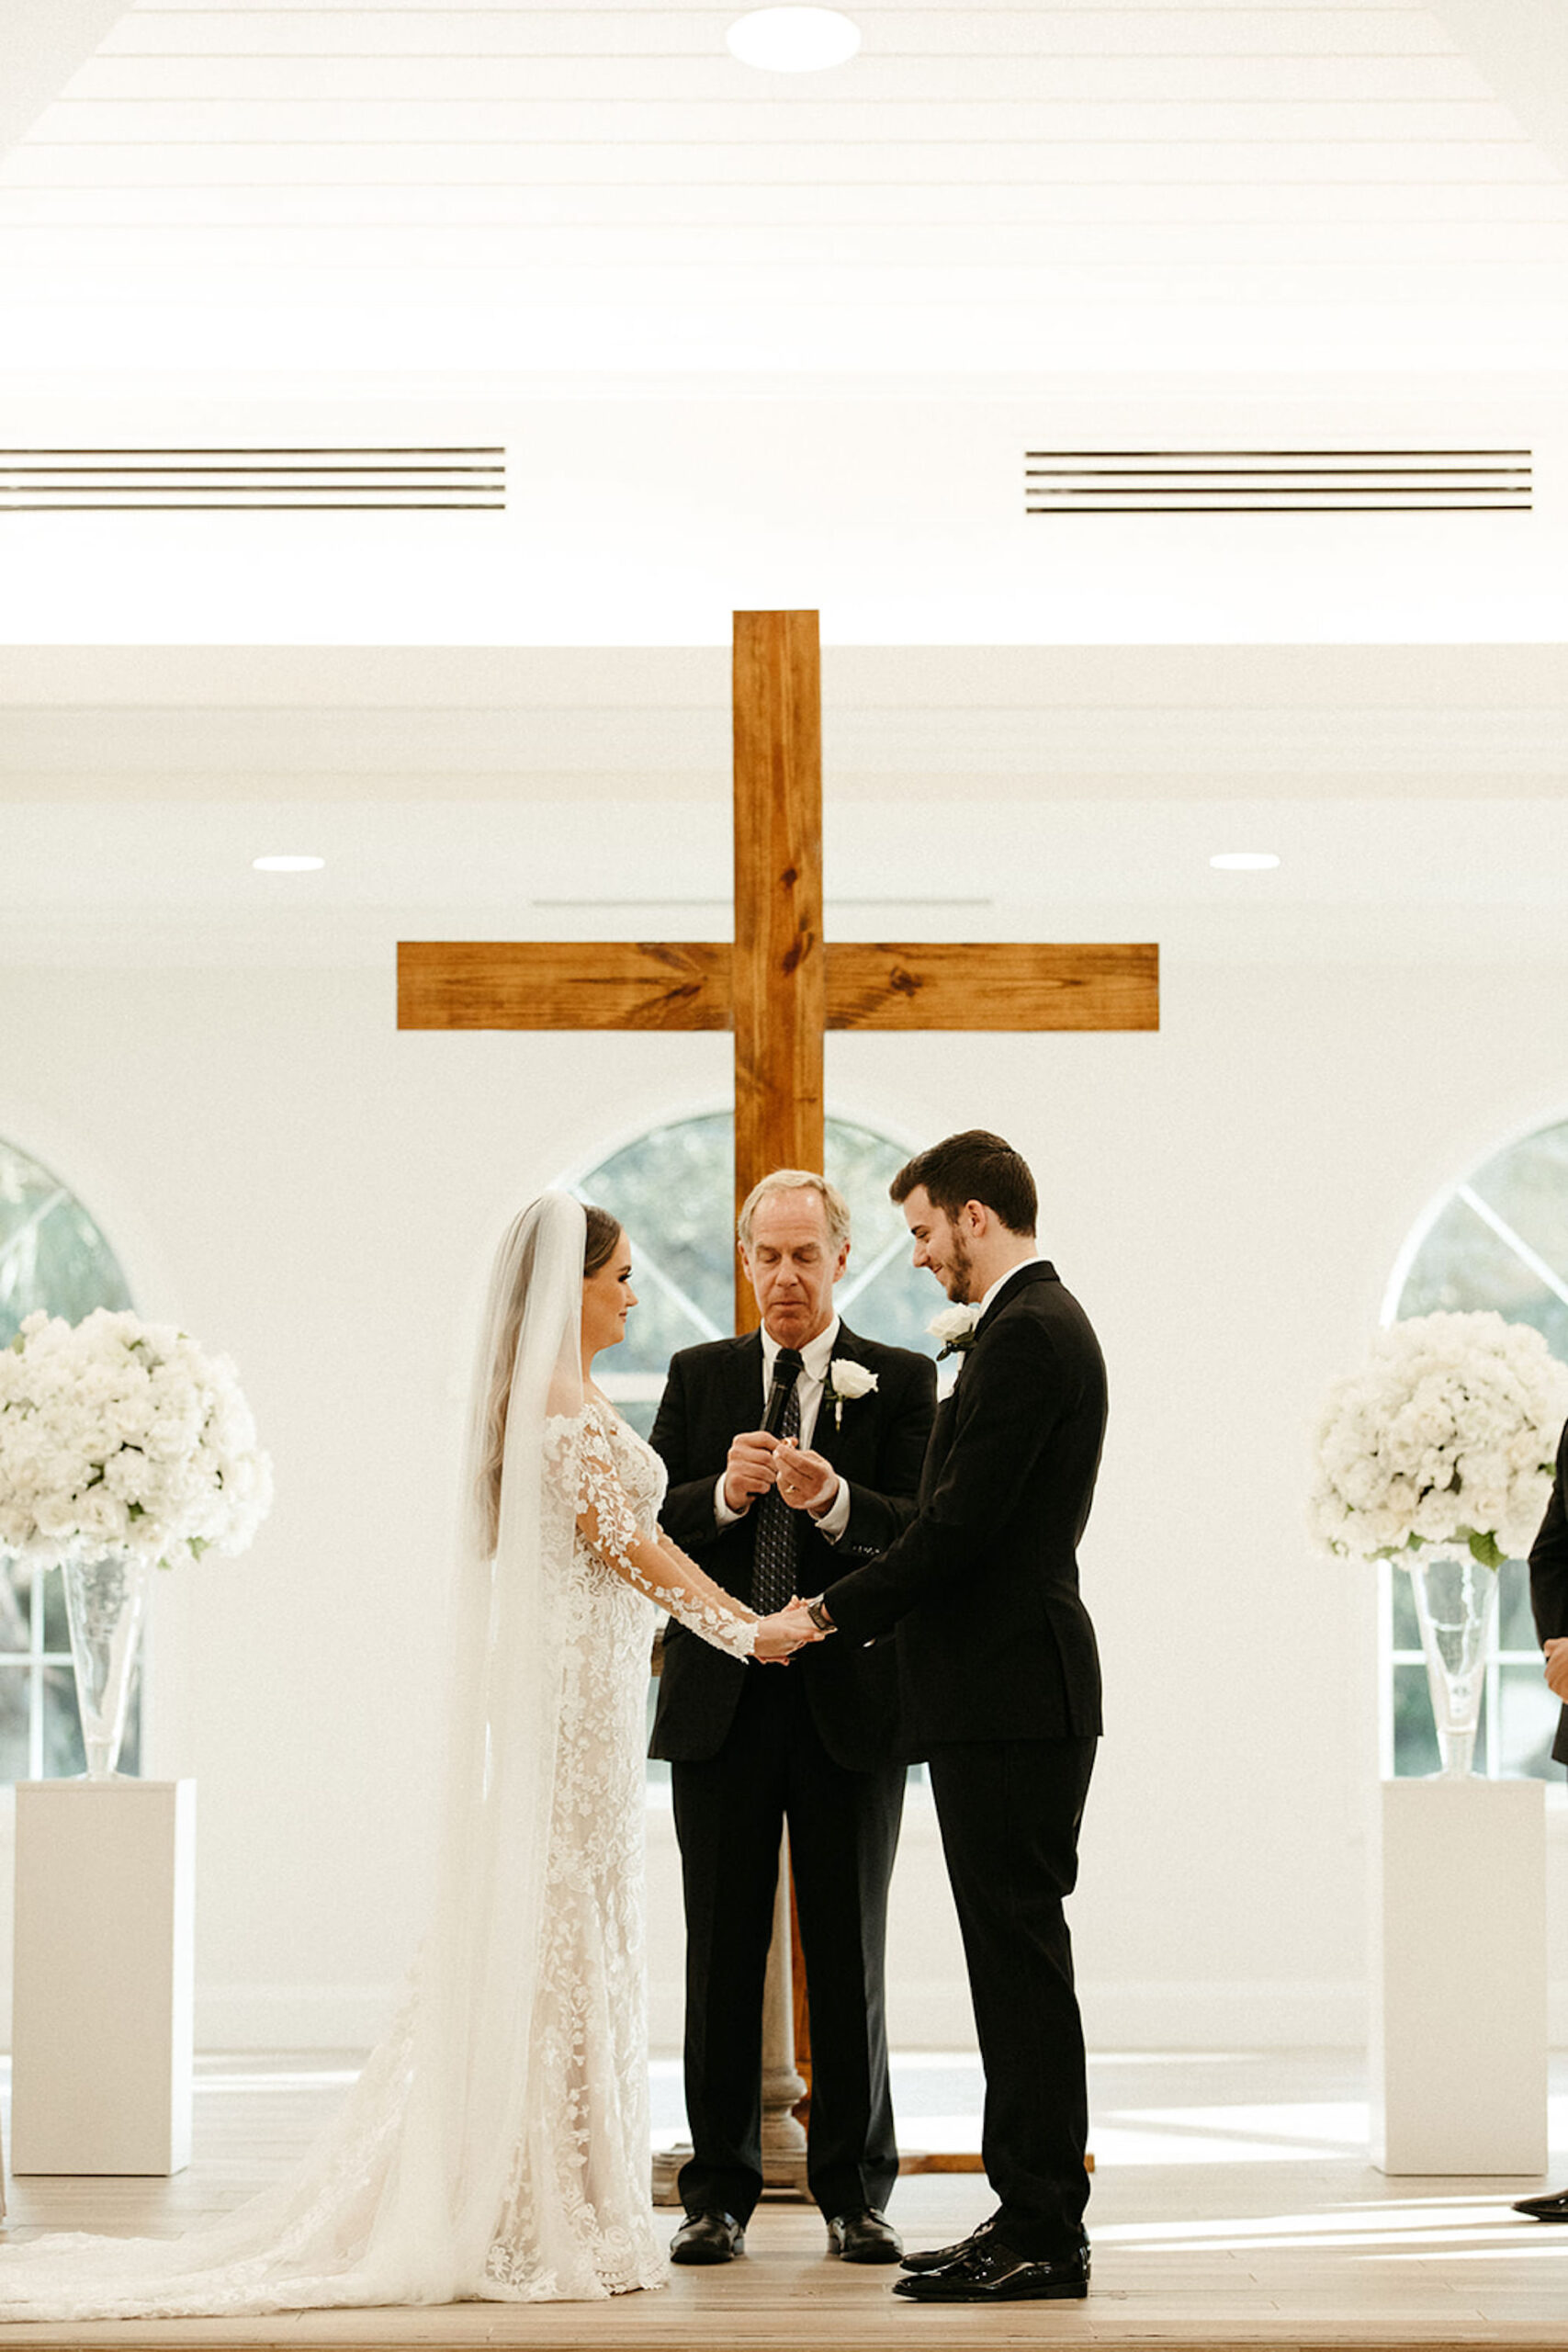 Bride and Groom Exchange Vows in Timeless Neutral White and Black St. Petersburg Chapel Wedding Ceremony | Harborside Chapel